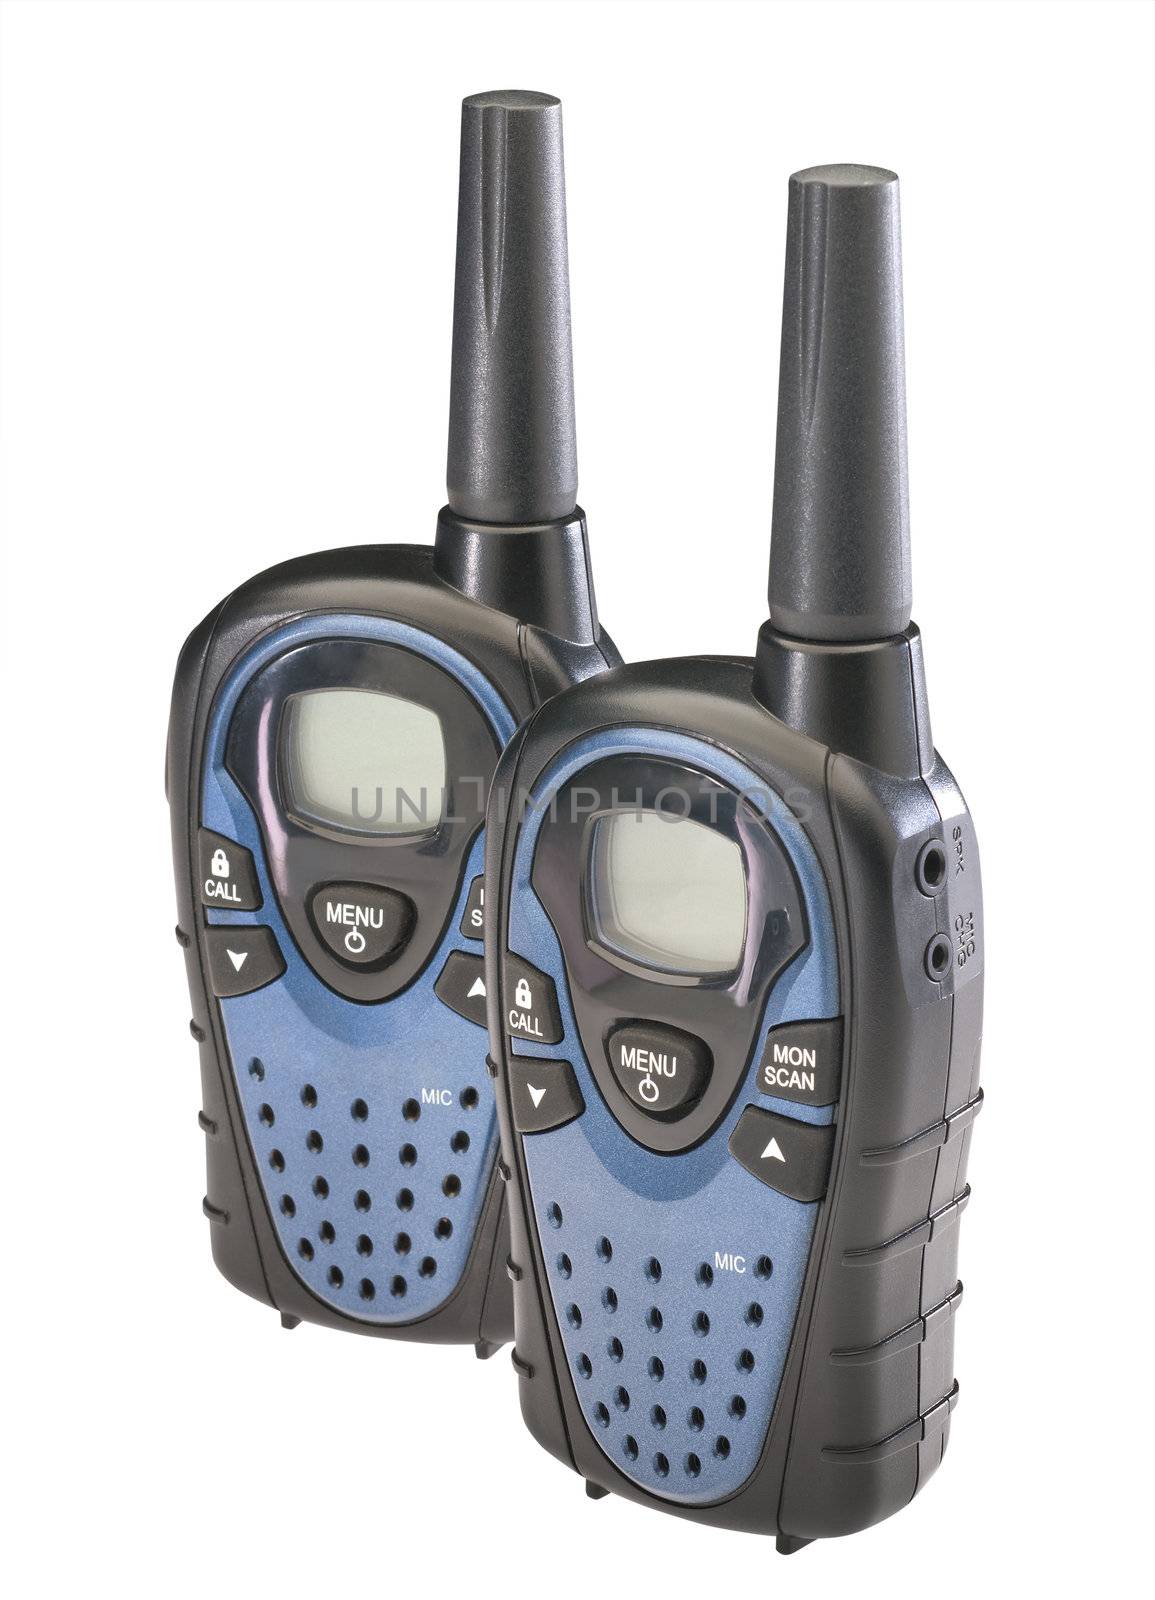 Two walkie talkies isolated on a white background with clipping path